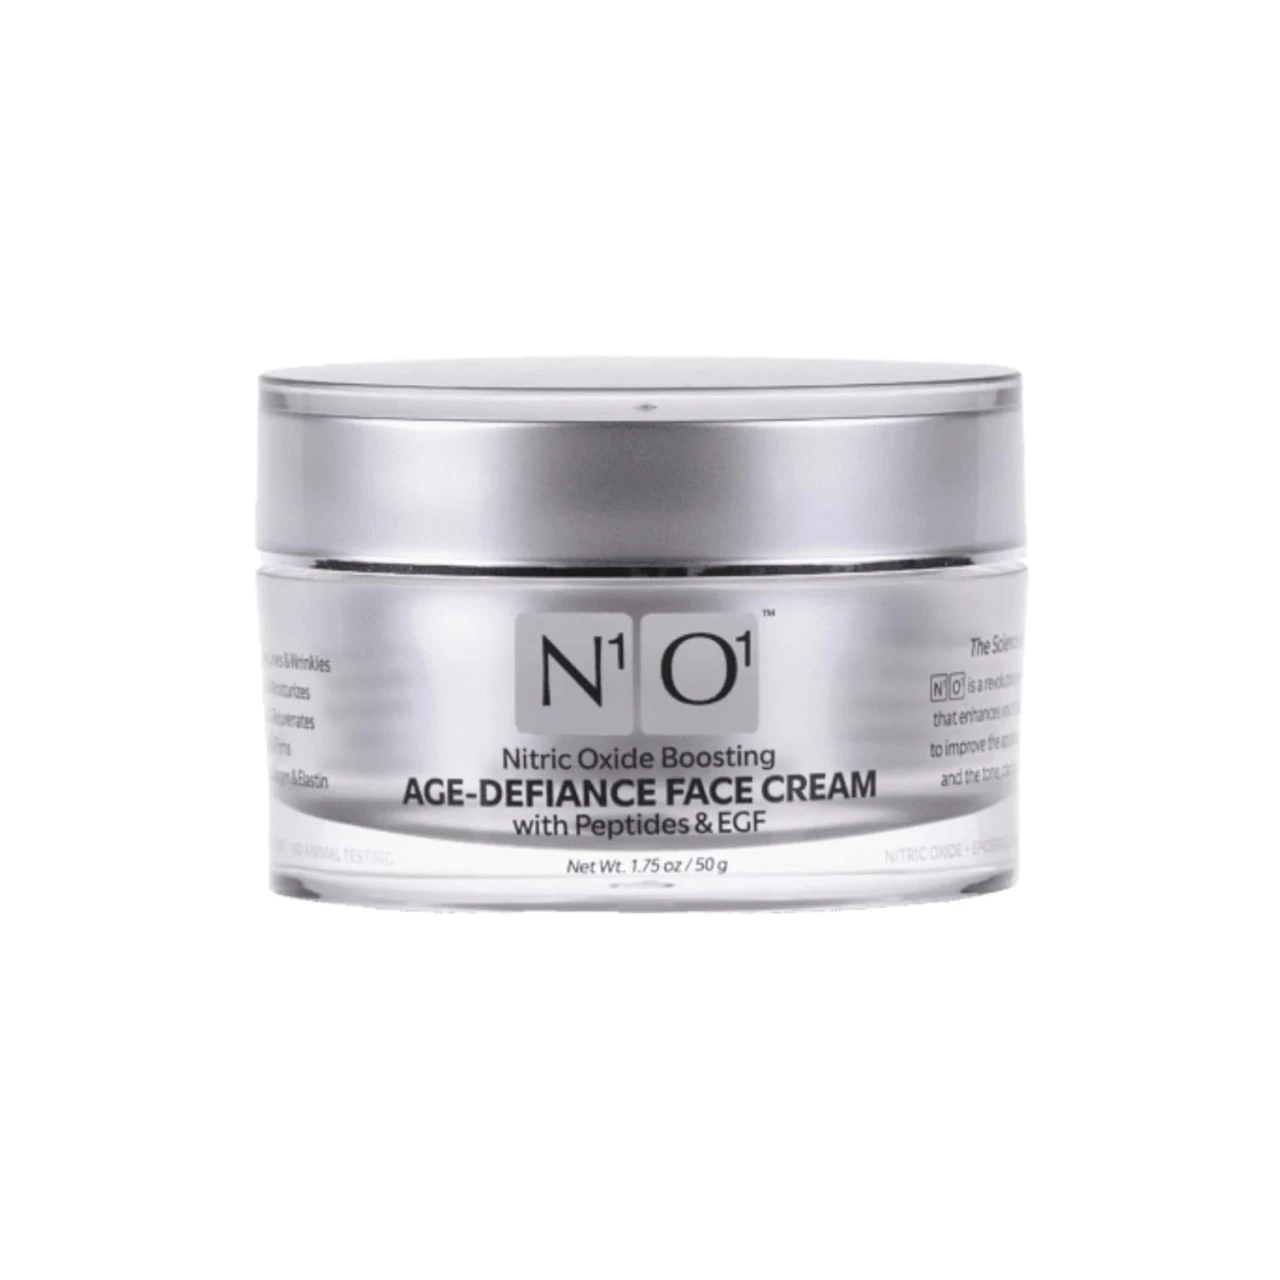 N1O1 Nitric Oxide Anti Aging Face Cream/ Complex Peptides, Epidermal Growth Factor, Collagen &amp; Elastin Boosting, Pore Minimizer, Hydrating Face Cream/ Reduces Wrinkles, Fine Lines &amp; Helps Dark Spots / 1.75 oz, 50 g